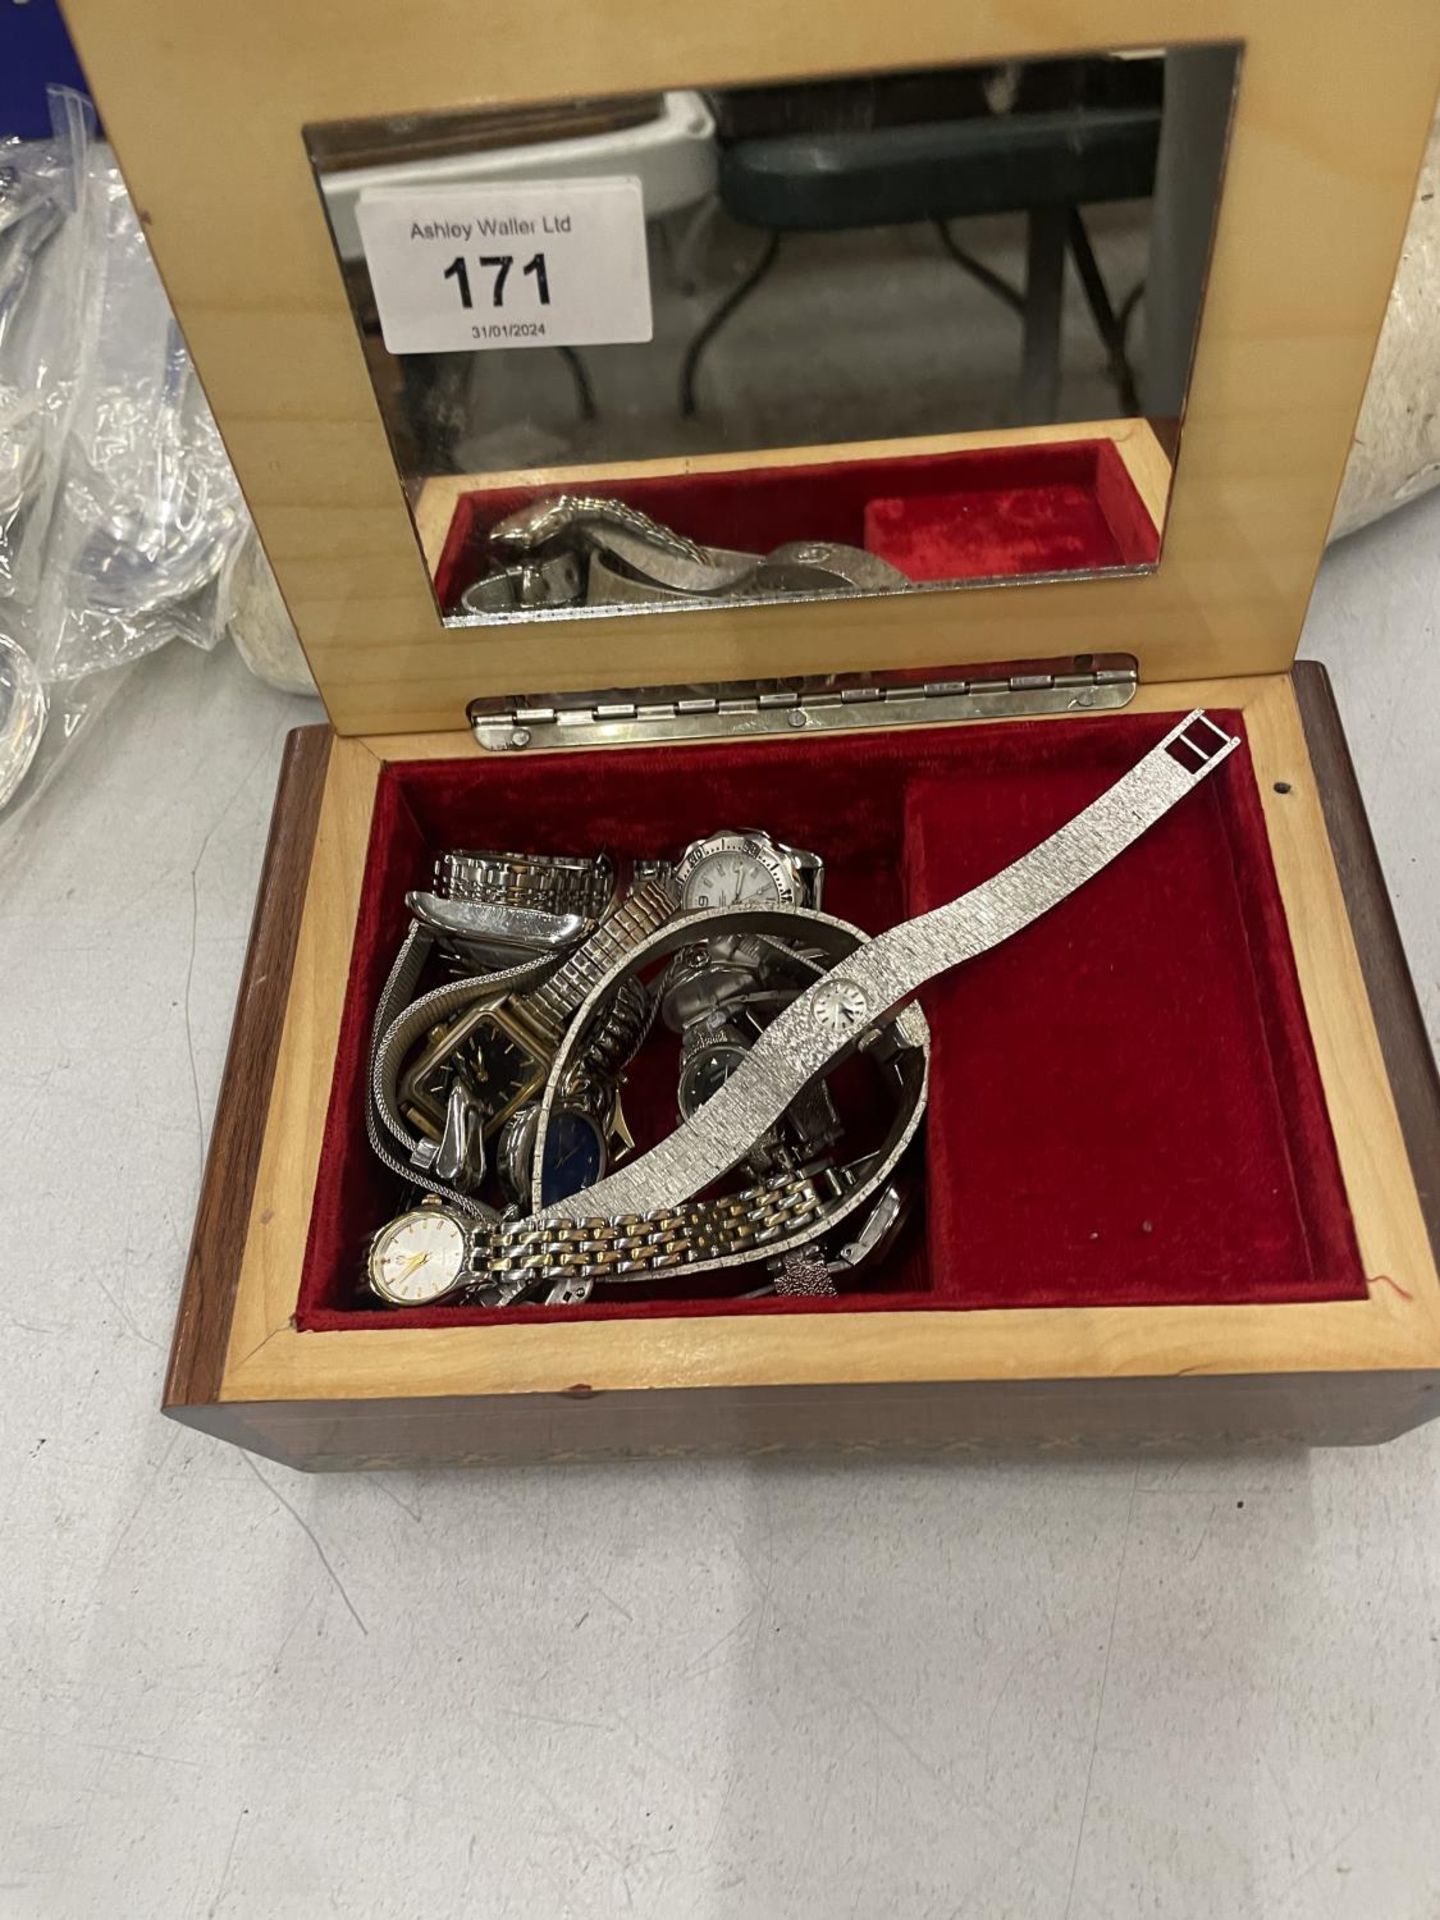 AN INLAID JEWELLERY BOX CONTAINING A QUANTITY OF LADIES WRISTWATCHES